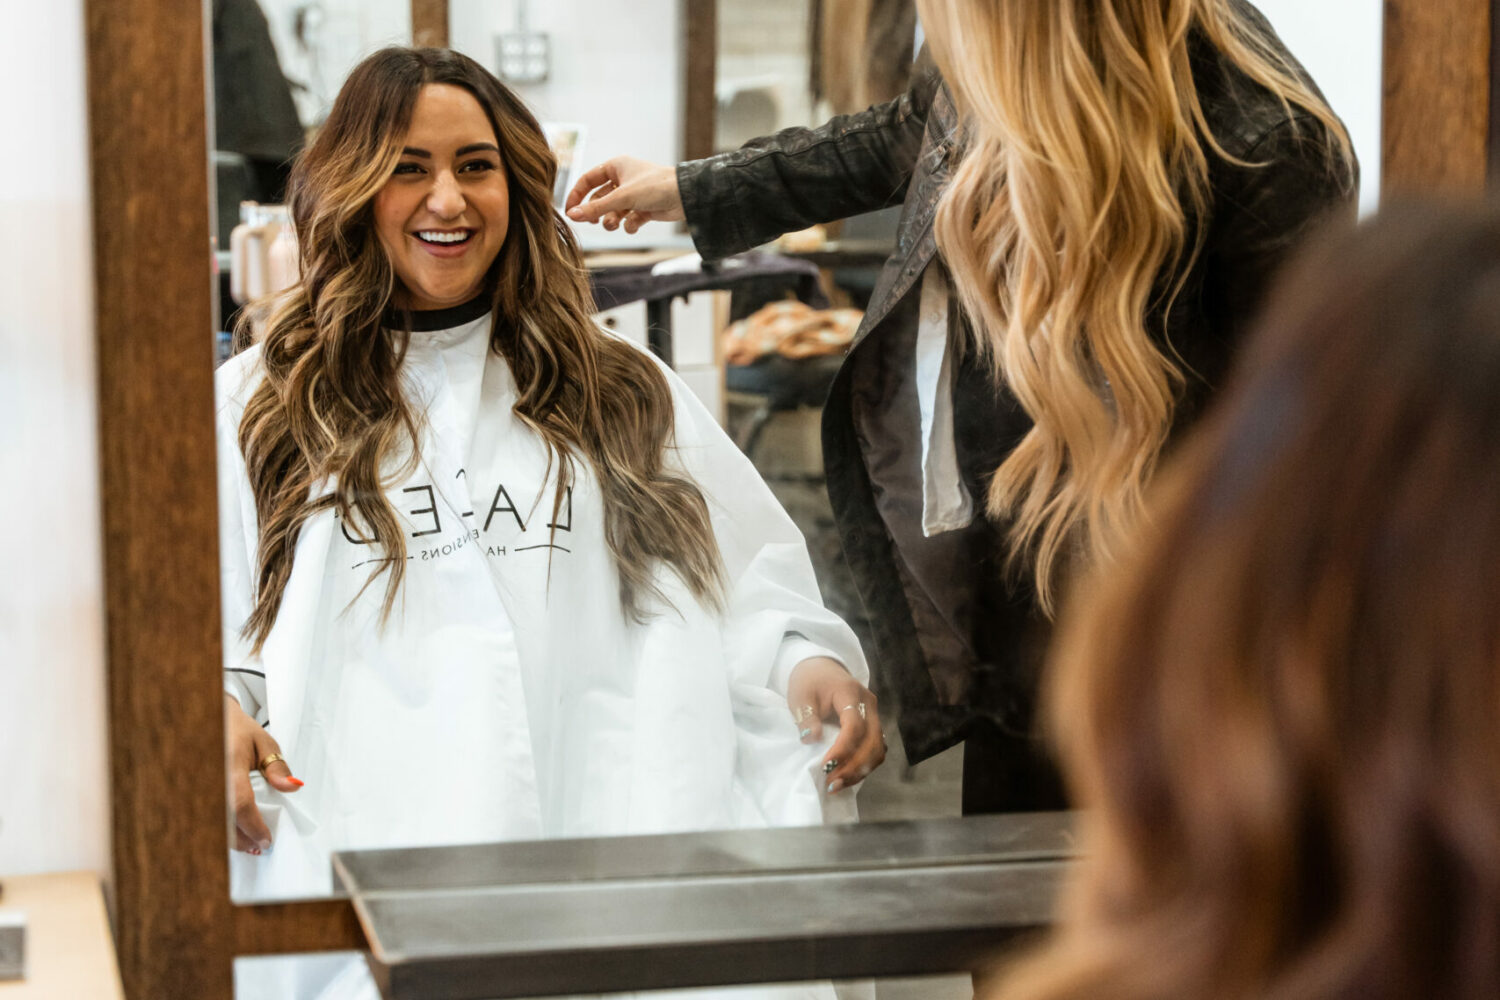 How Lacy Gadegaard West founded Laced Hair Extensions, the Laced Foundation and used her own health diagnosis to help inspire confidence in women.